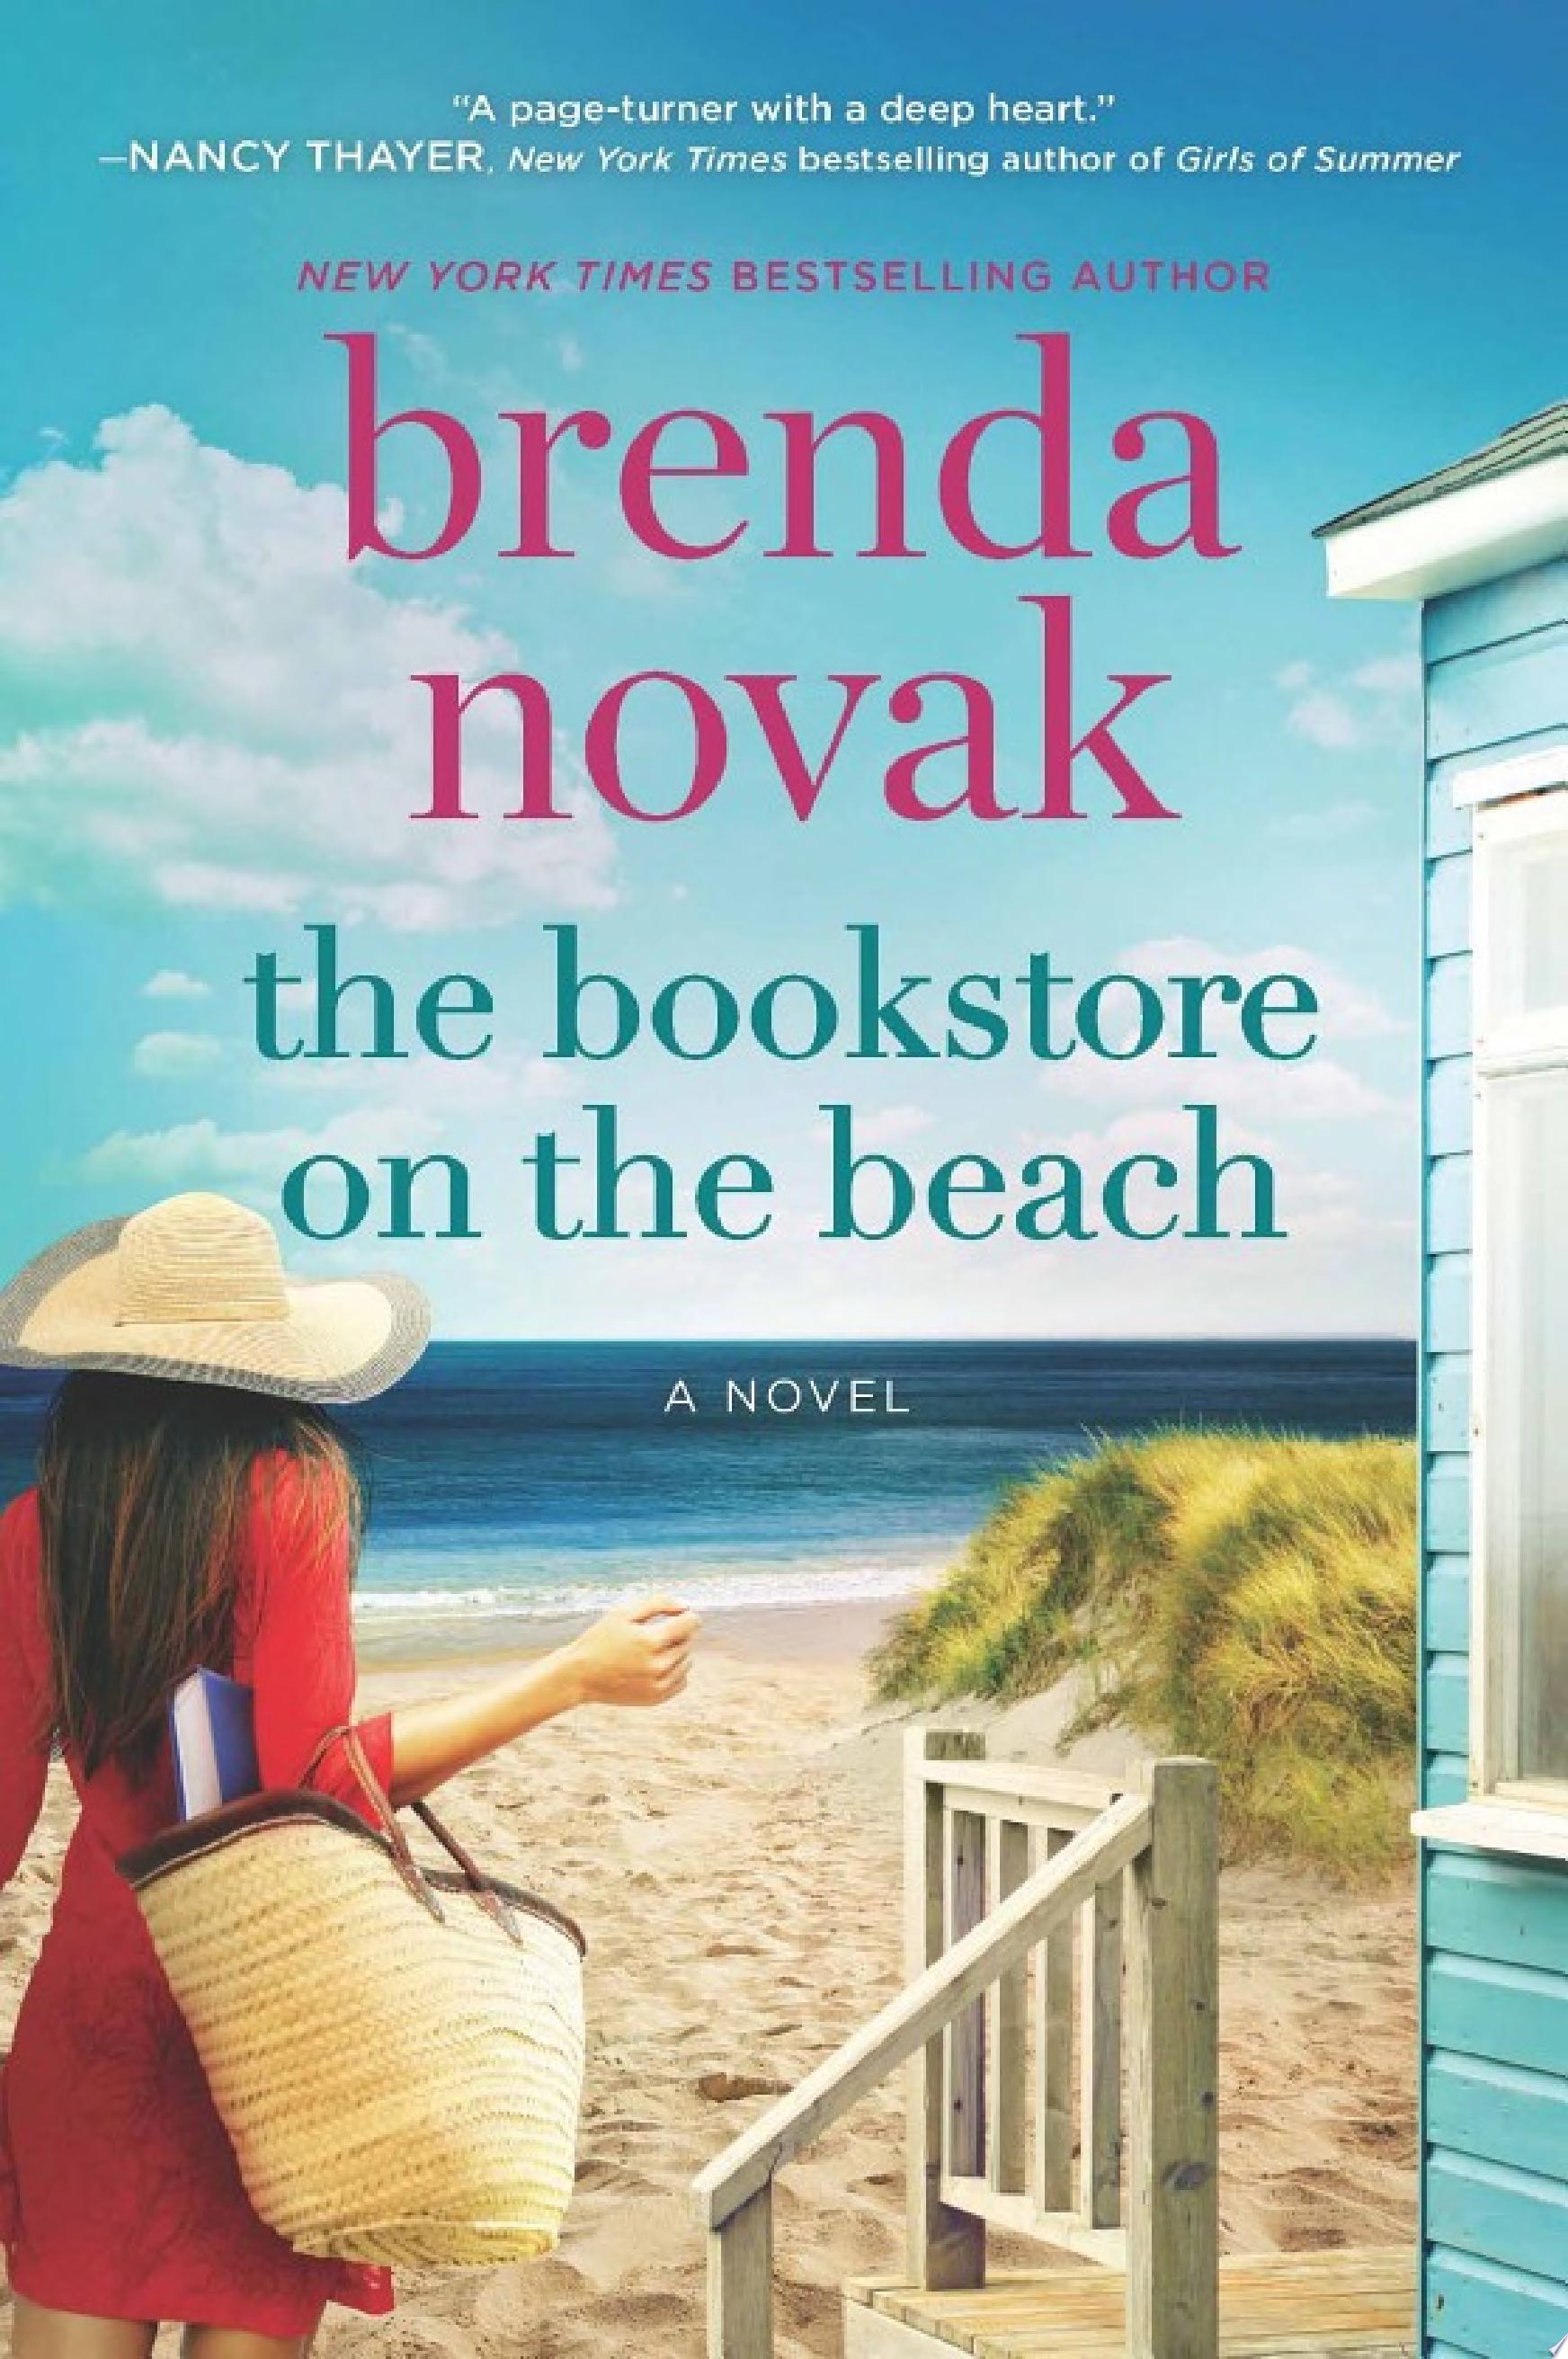 Image for "The Bookstore on the Beach"